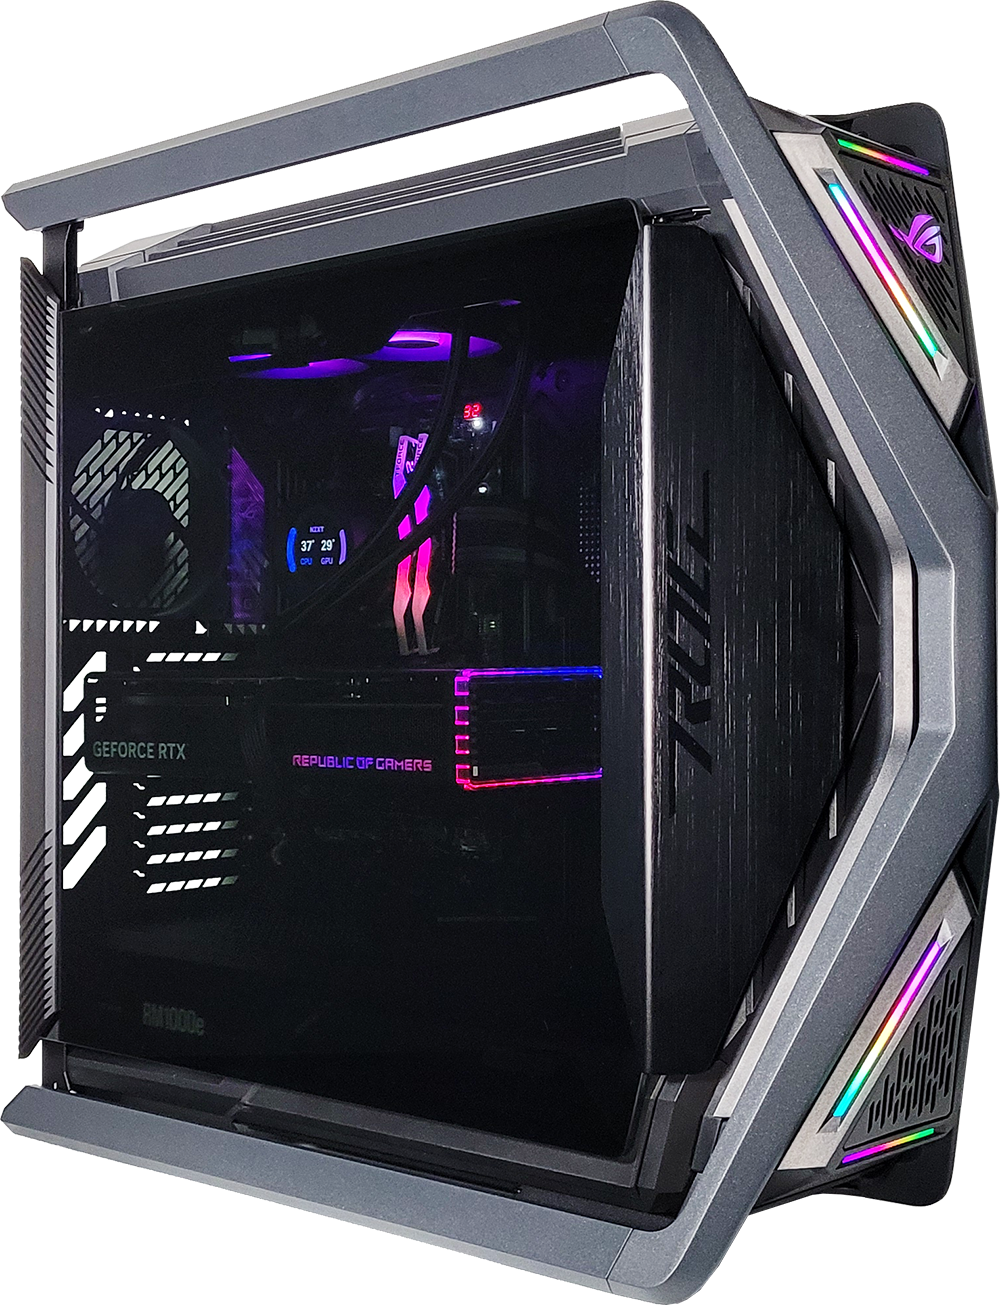 Massive ASUS ROG Hyperion full-tower gaming case launches